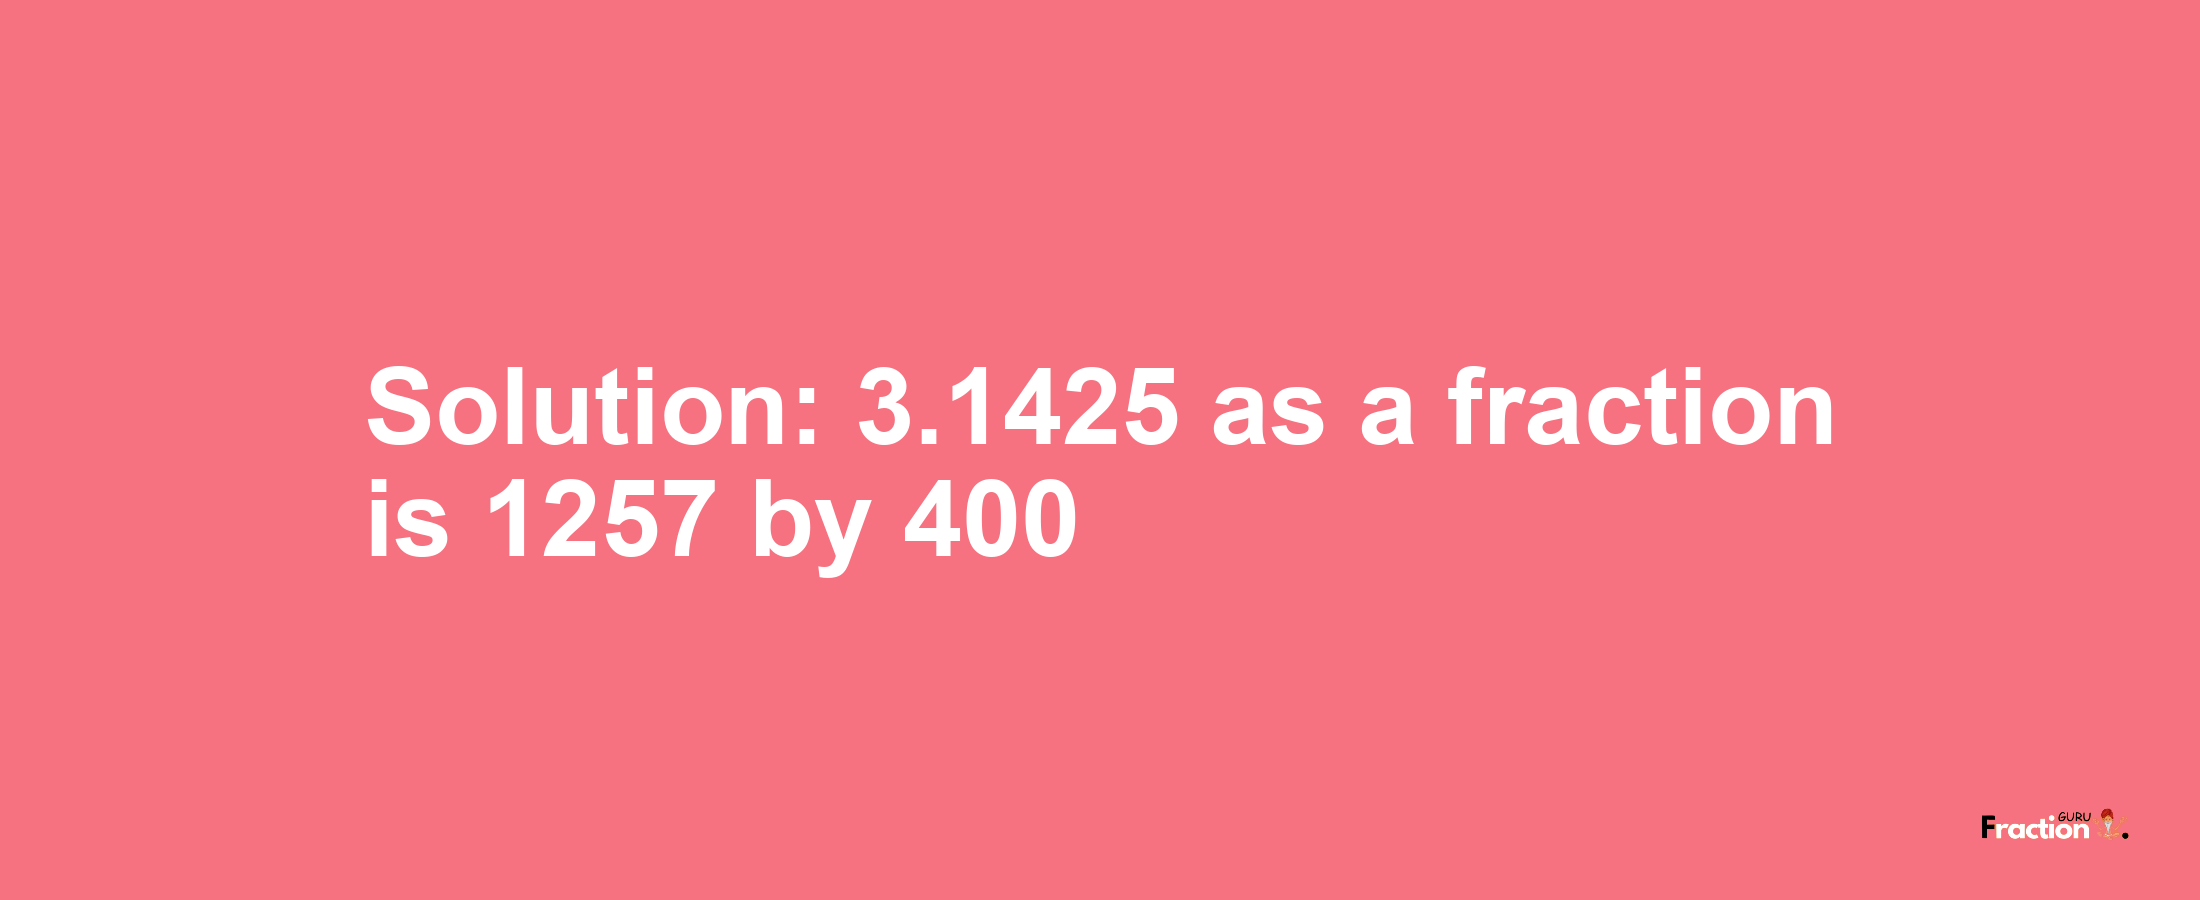 Solution:3.1425 as a fraction is 1257/400